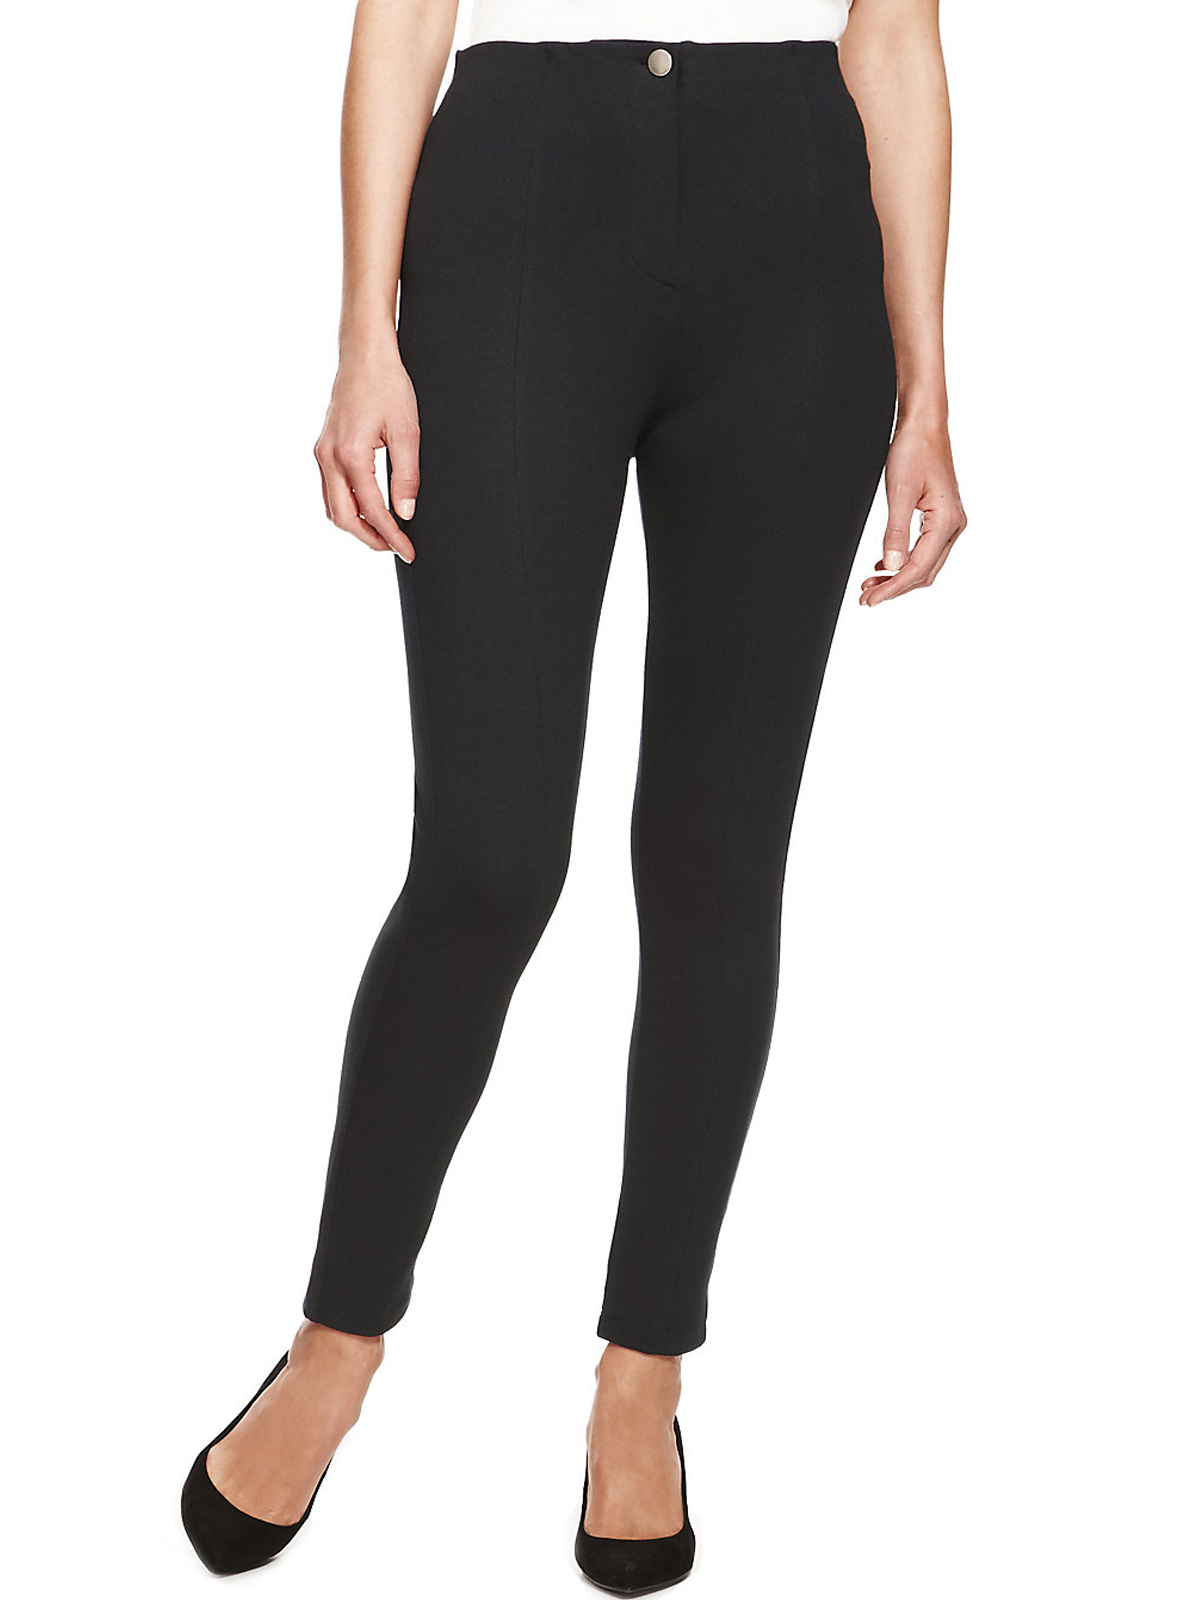 Marks and Spencer - - M&5 BLACK High Waisted Seam Leggings - Size 8 to 14